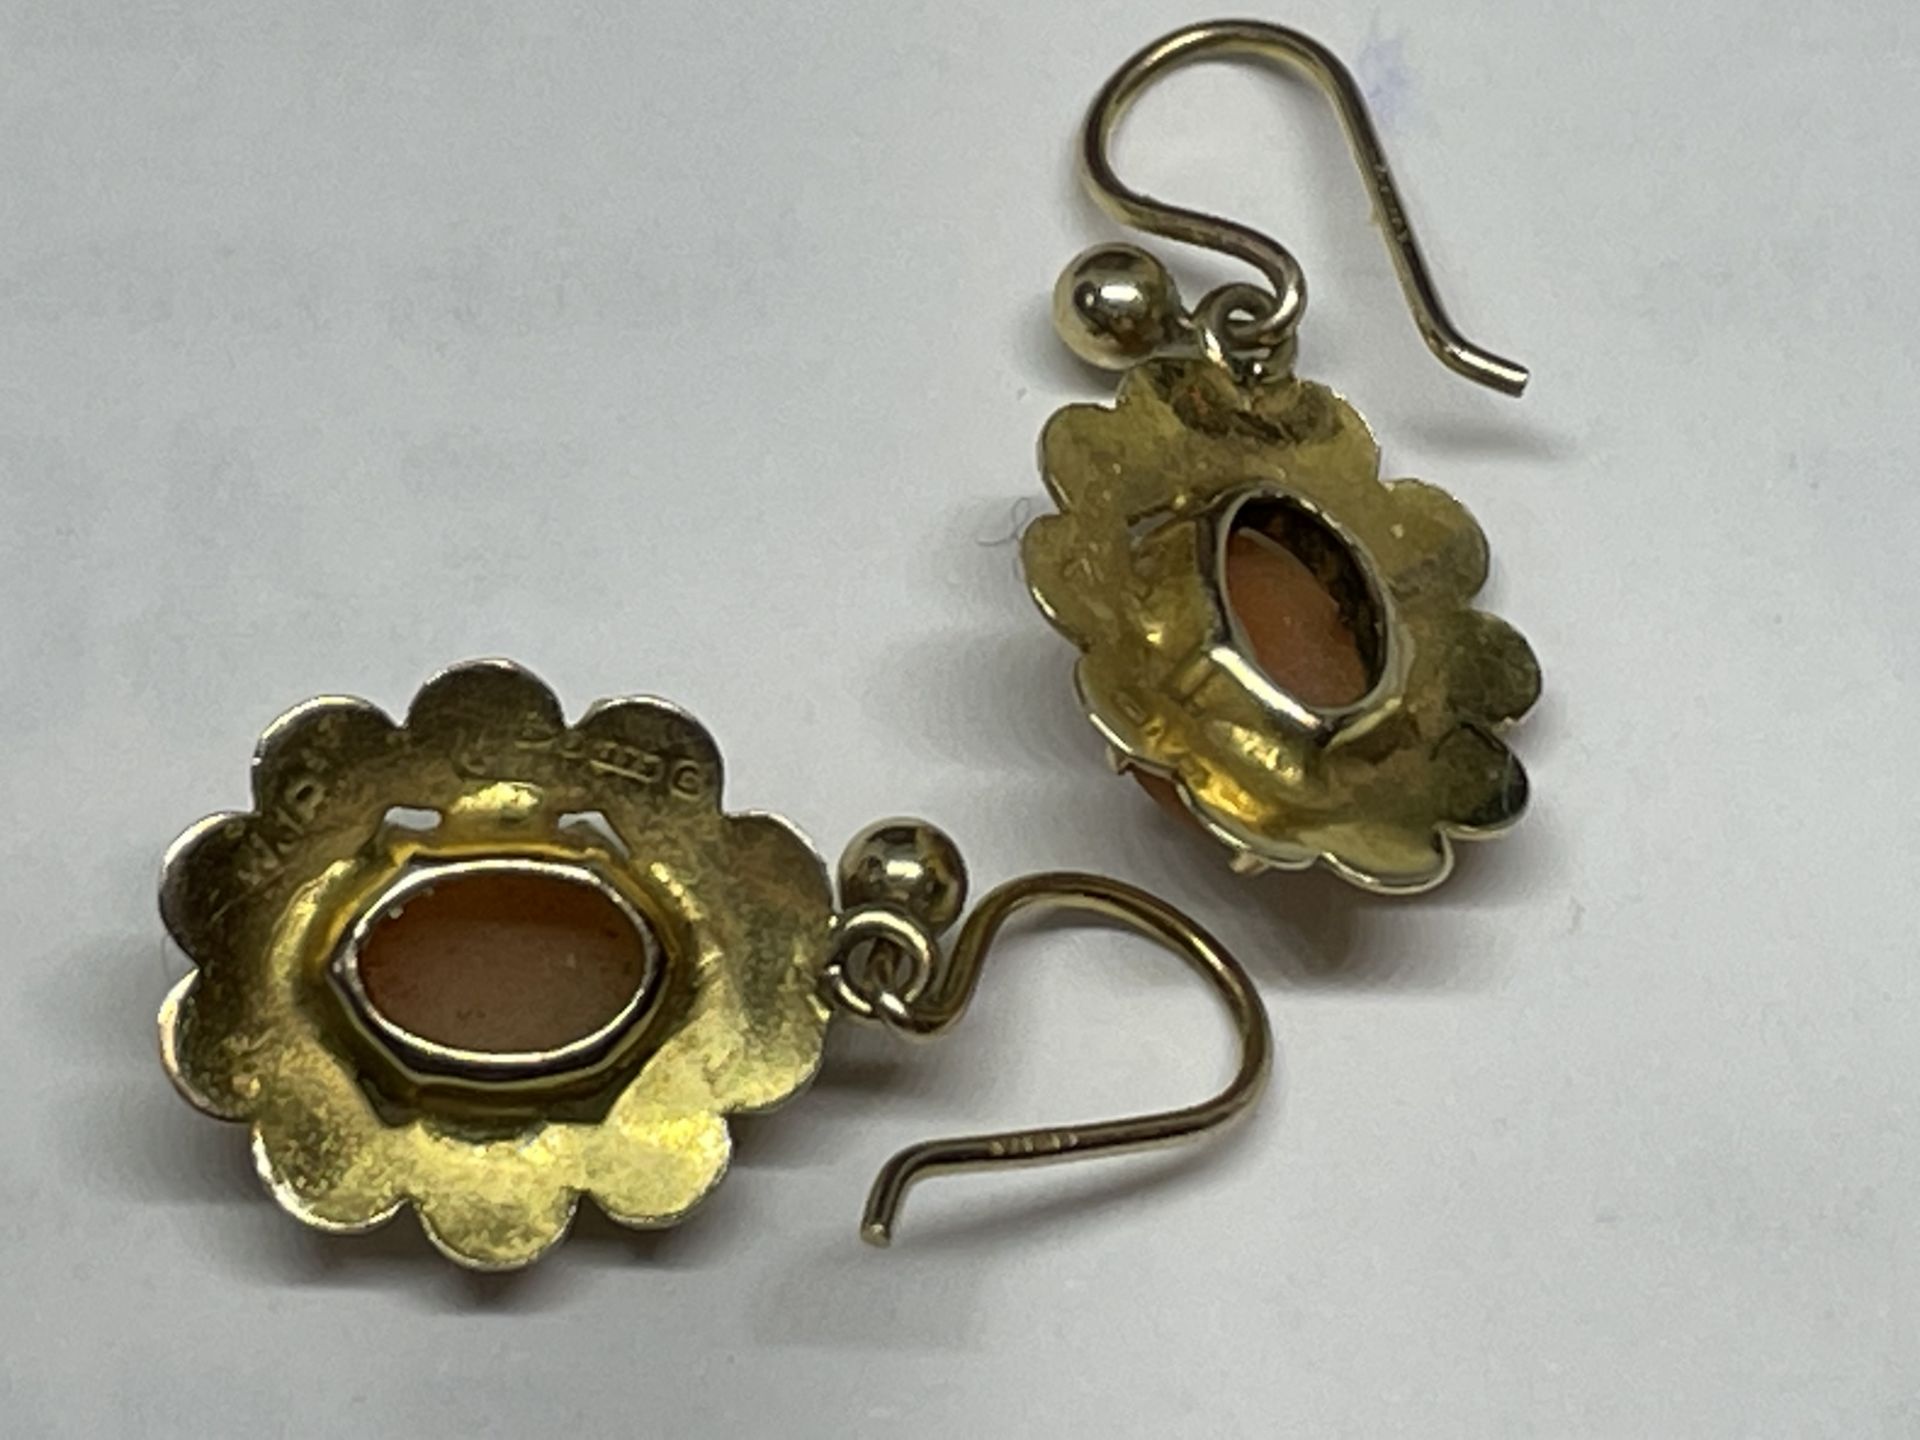 A PAIR OF MARKED 375 GOLD EARRINGS WITH CAMEOS IN A PRESENTATION BOX GROSS WEIGHT 1.87 GRAMS - Image 2 of 4